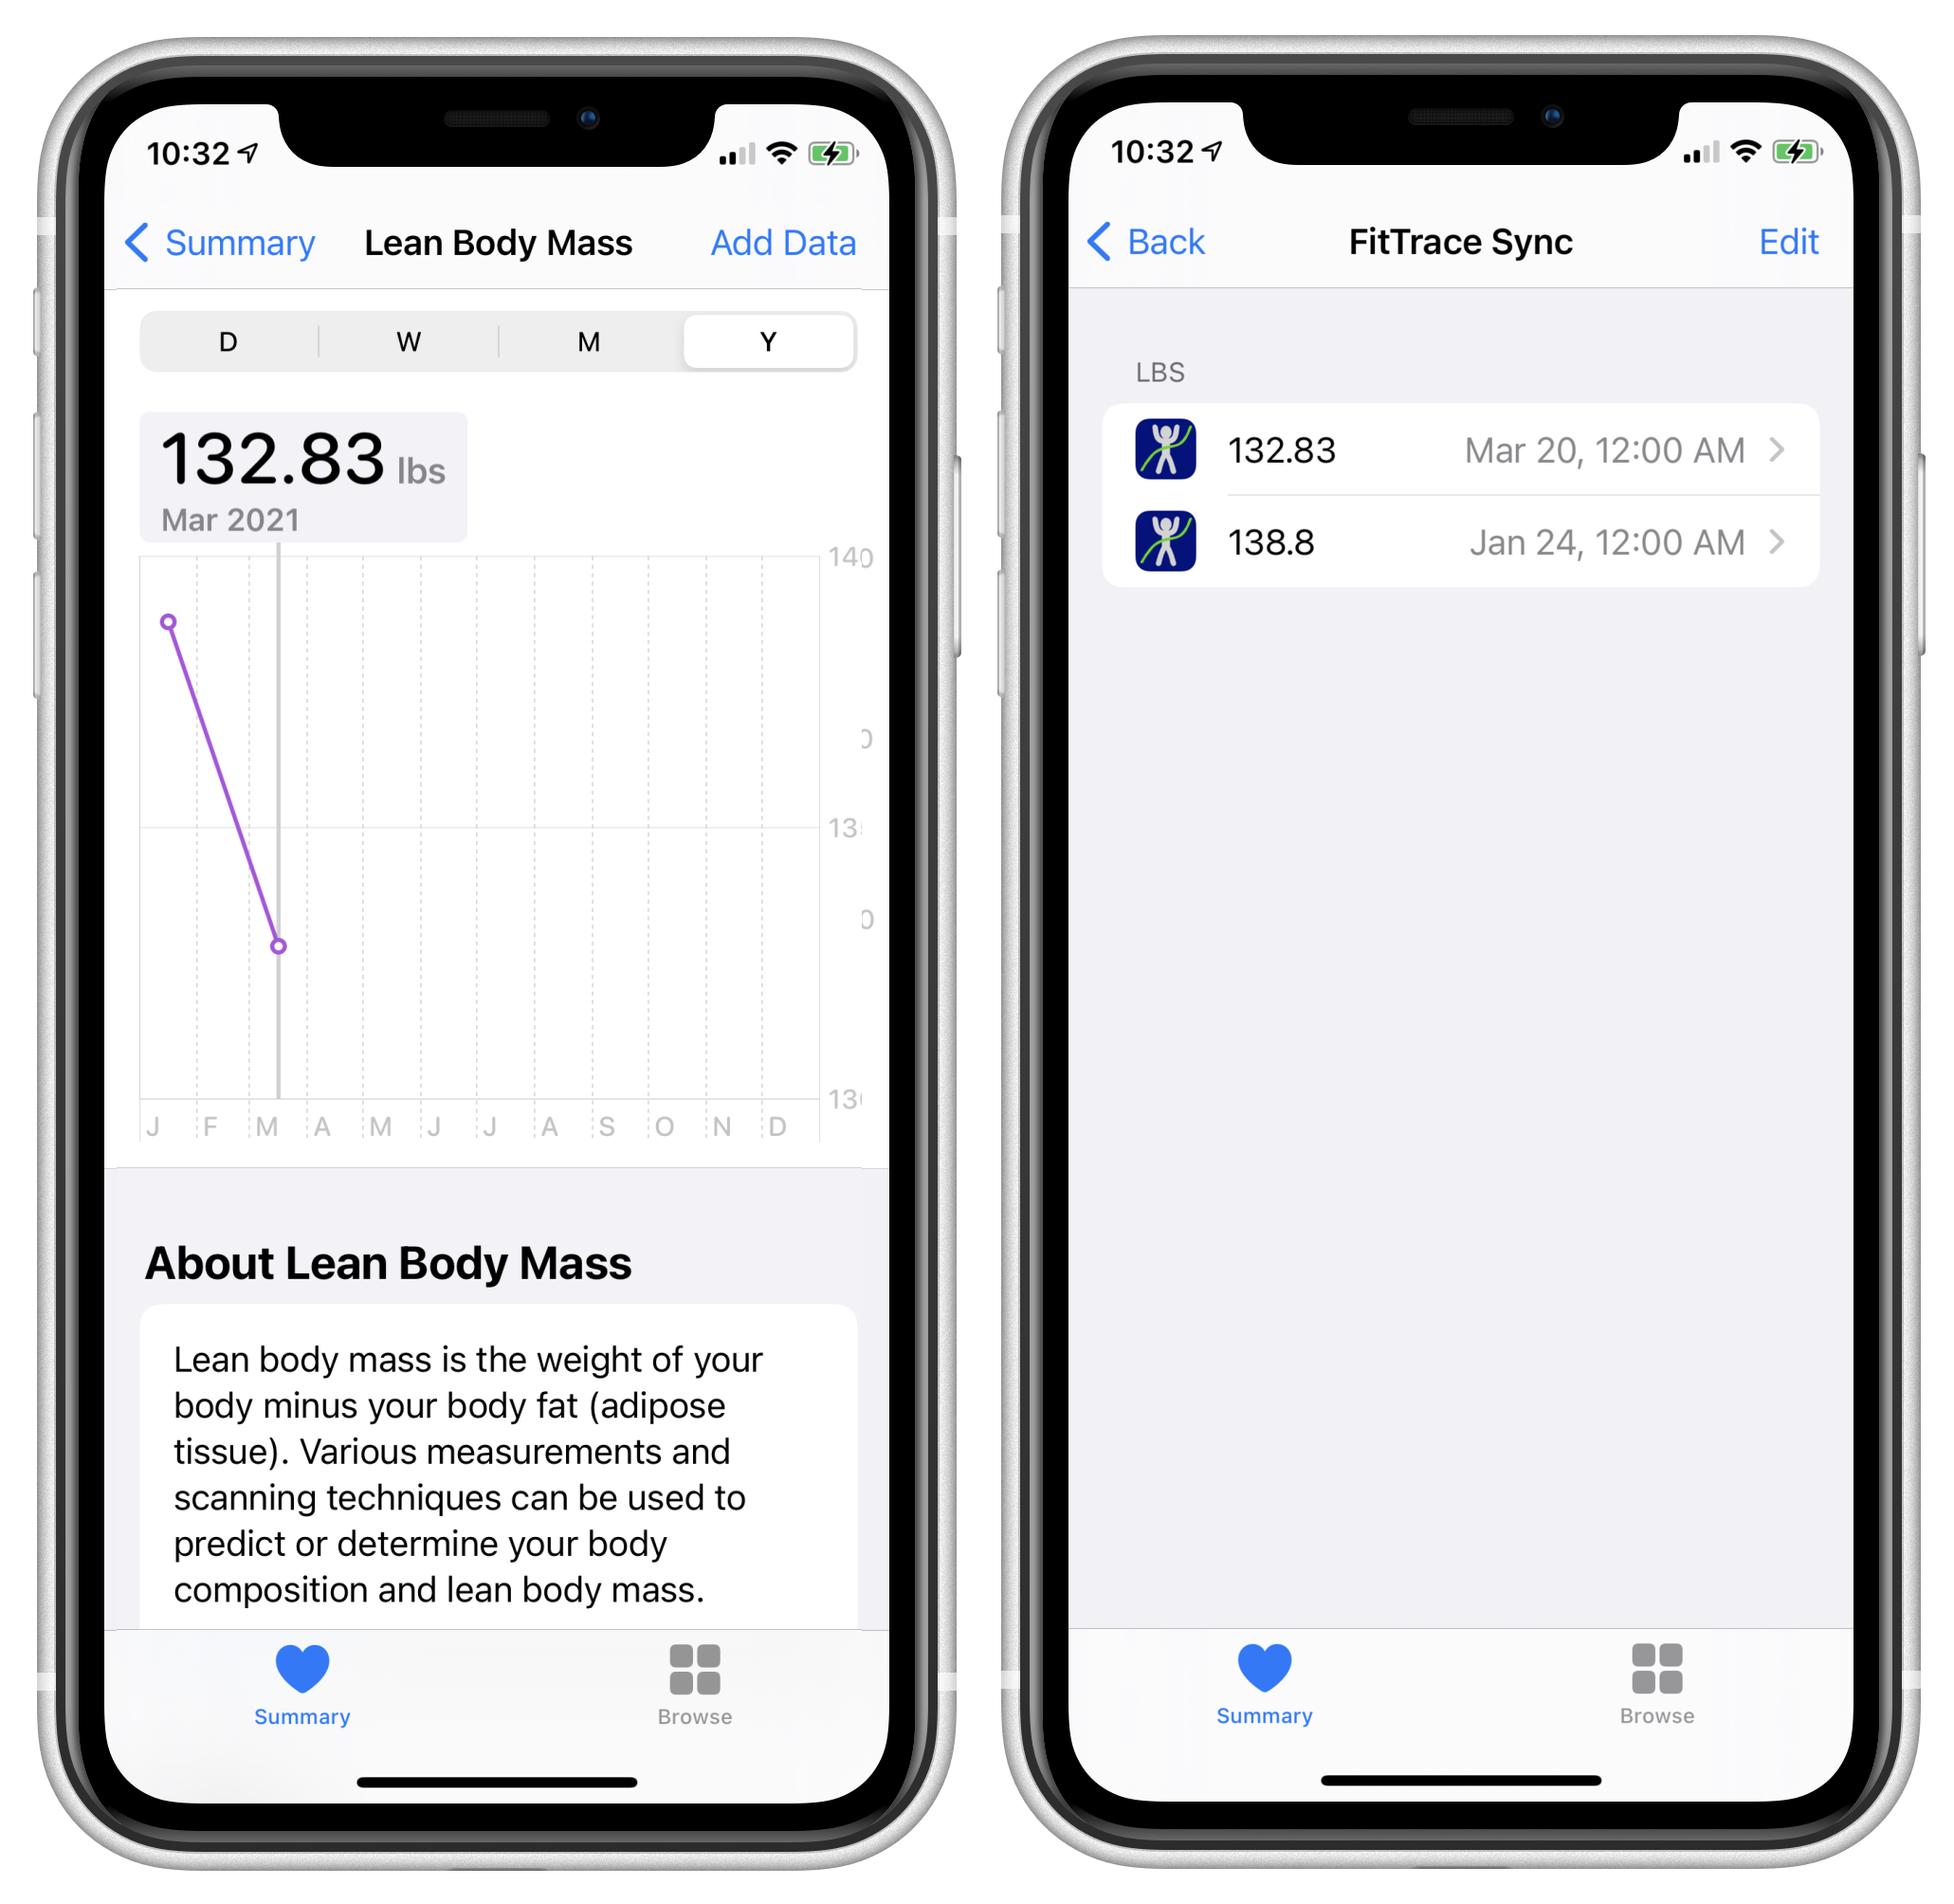 FitTrace Sync transfers DXA data to Apple Health